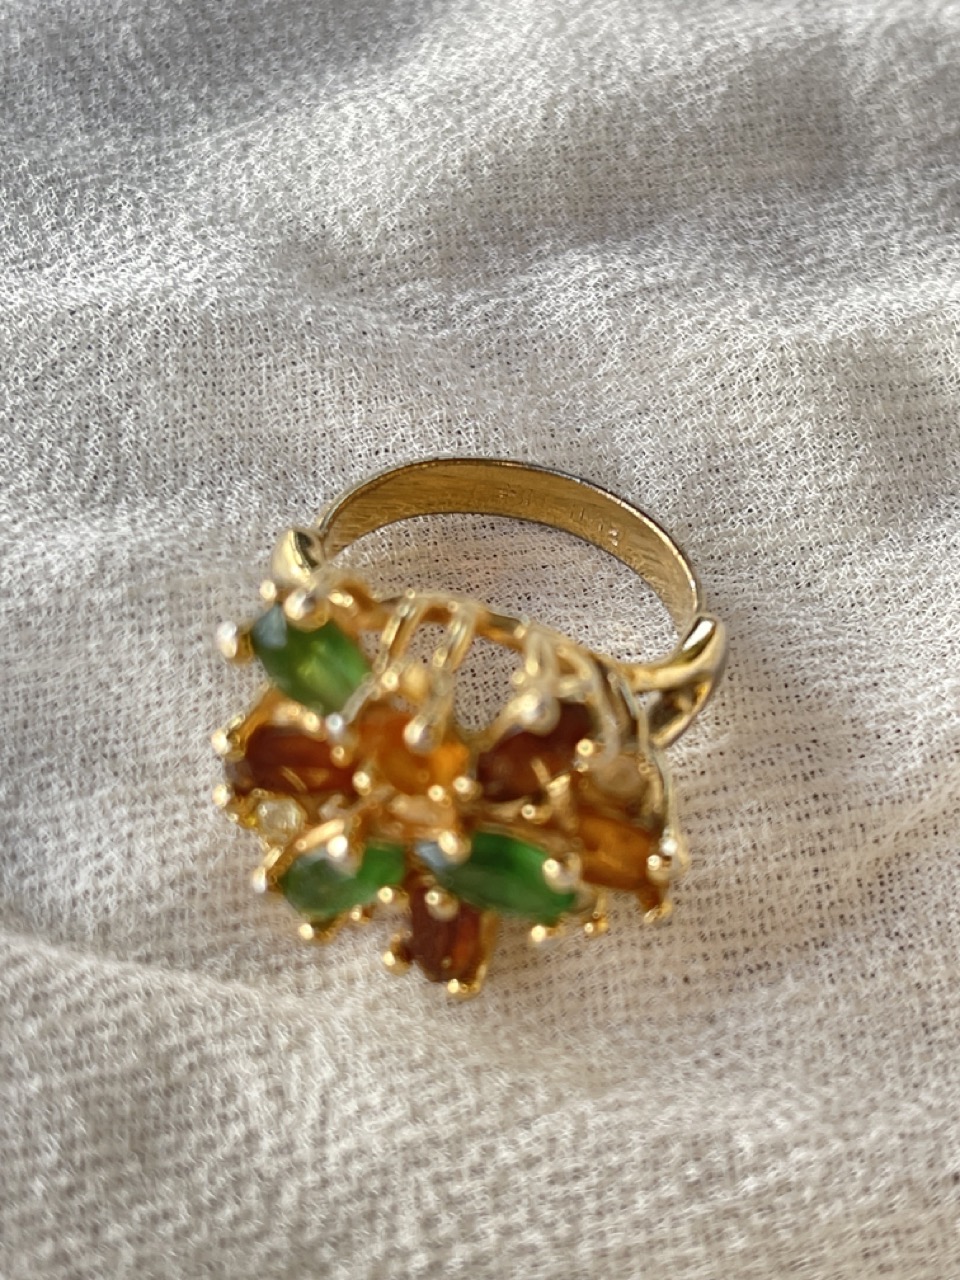 Hotbox-Vintage-South-Pasadena-California-Online-Vintage-Party-Rings-_0437 -